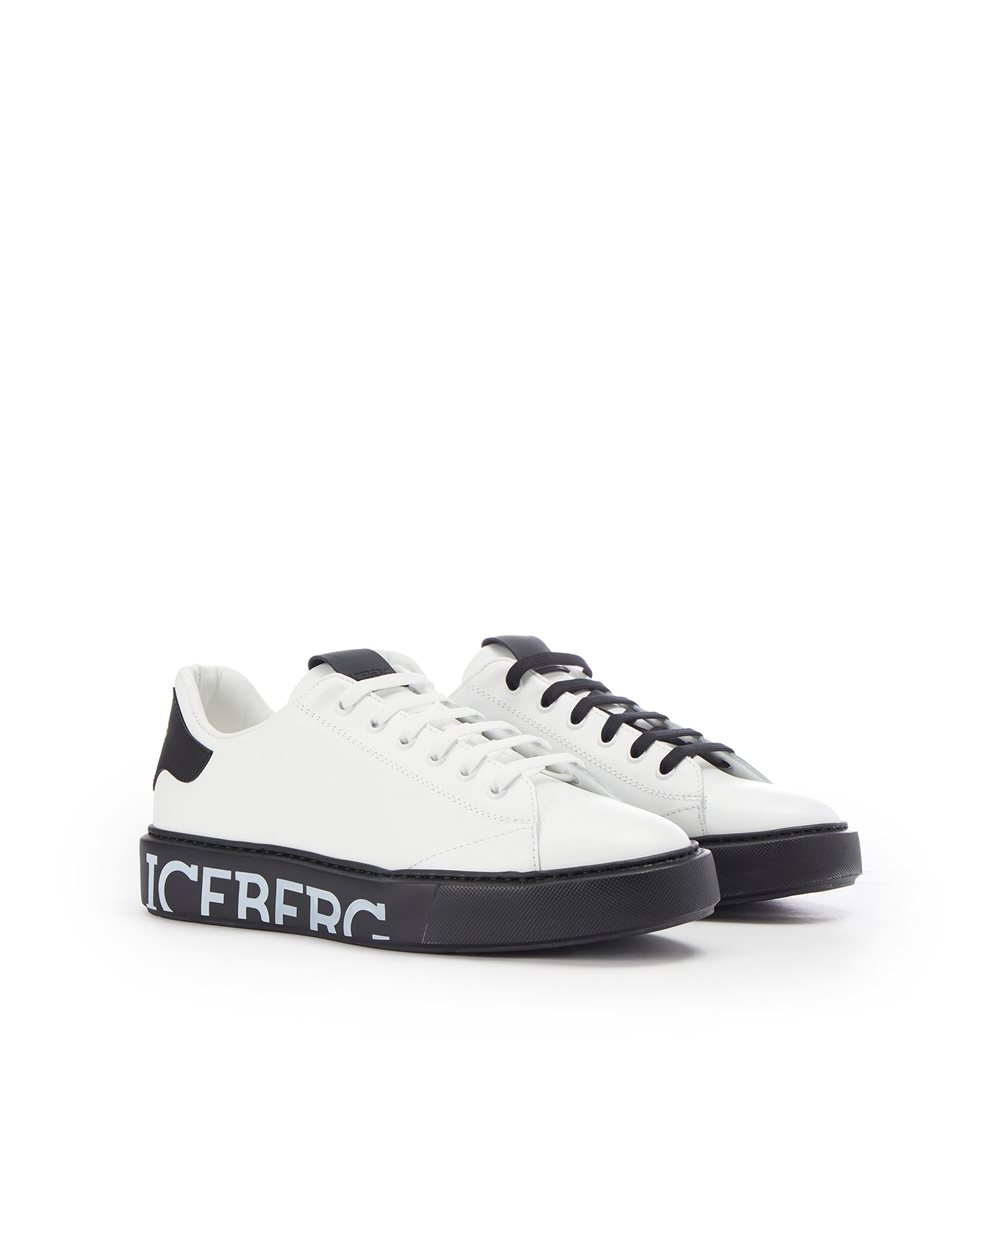 Leather Bozeman sneakers - Iceberg - Official Website